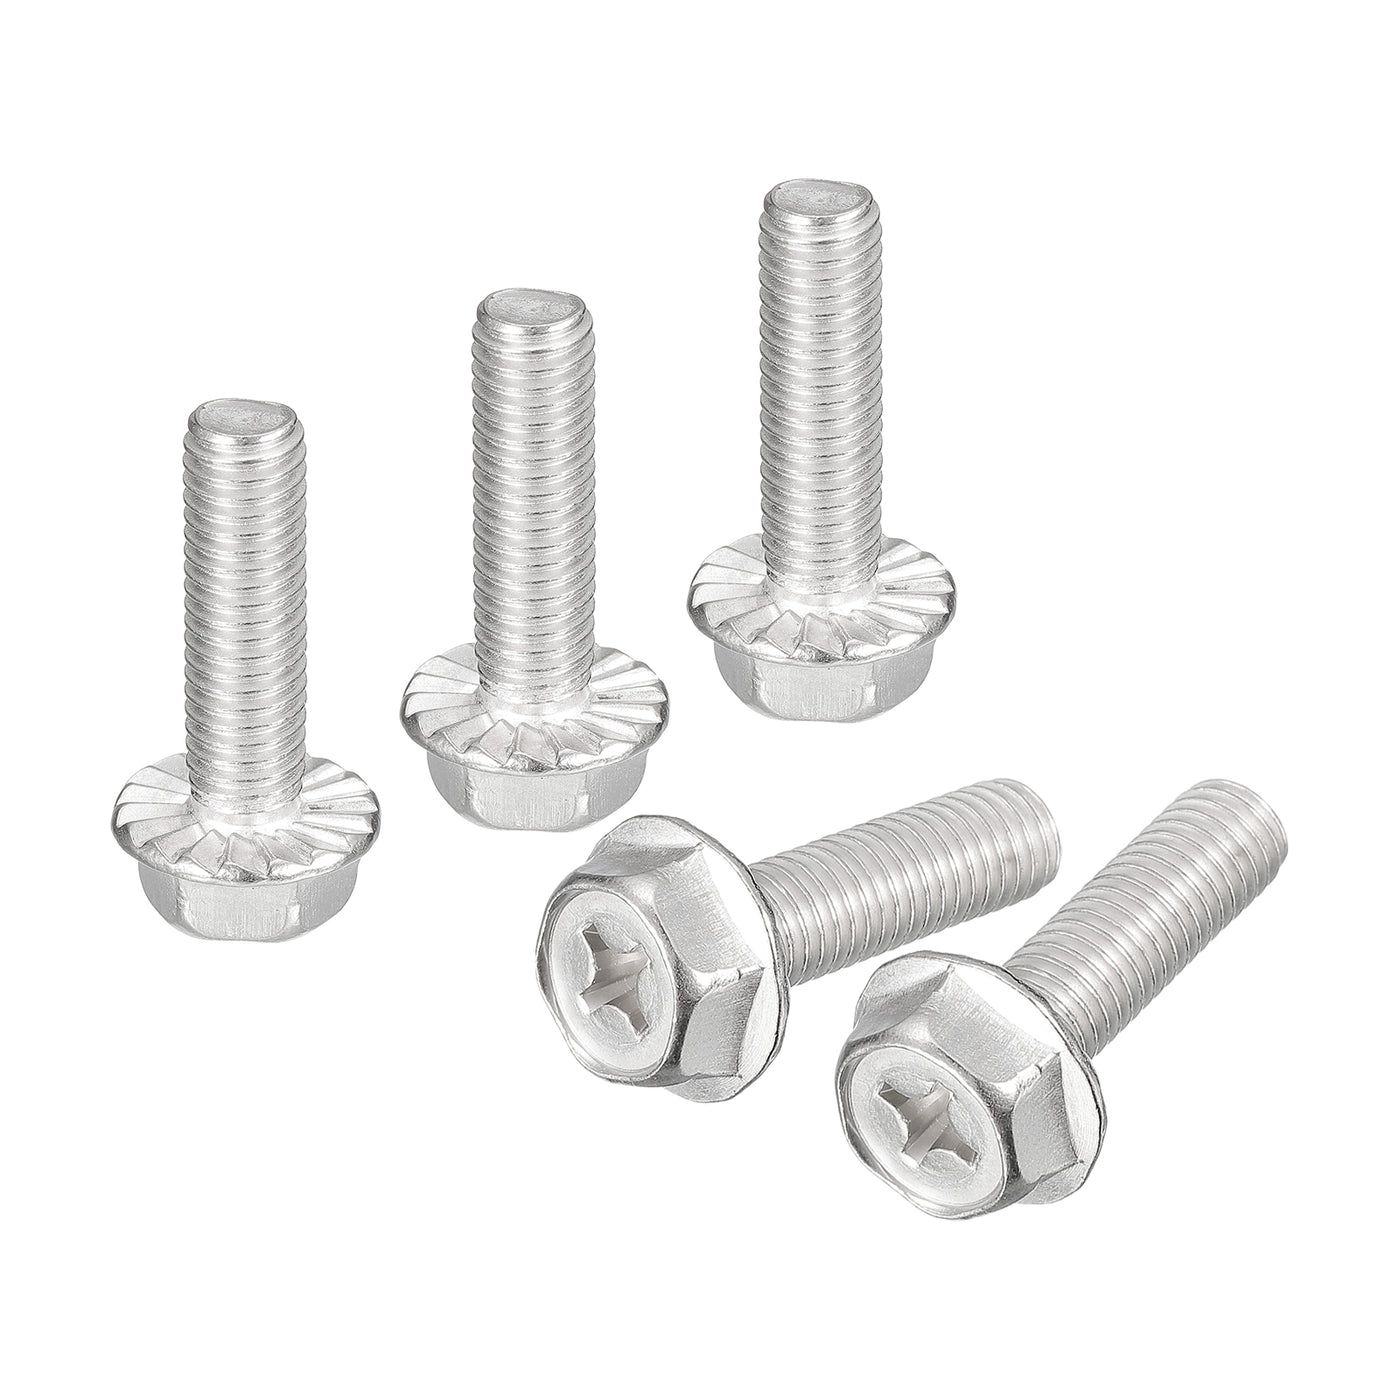 uxcell Uxcell M8x30mm Phillips Hex Head Flange Bolts, 10pcs 304 Stainless Steel Screws